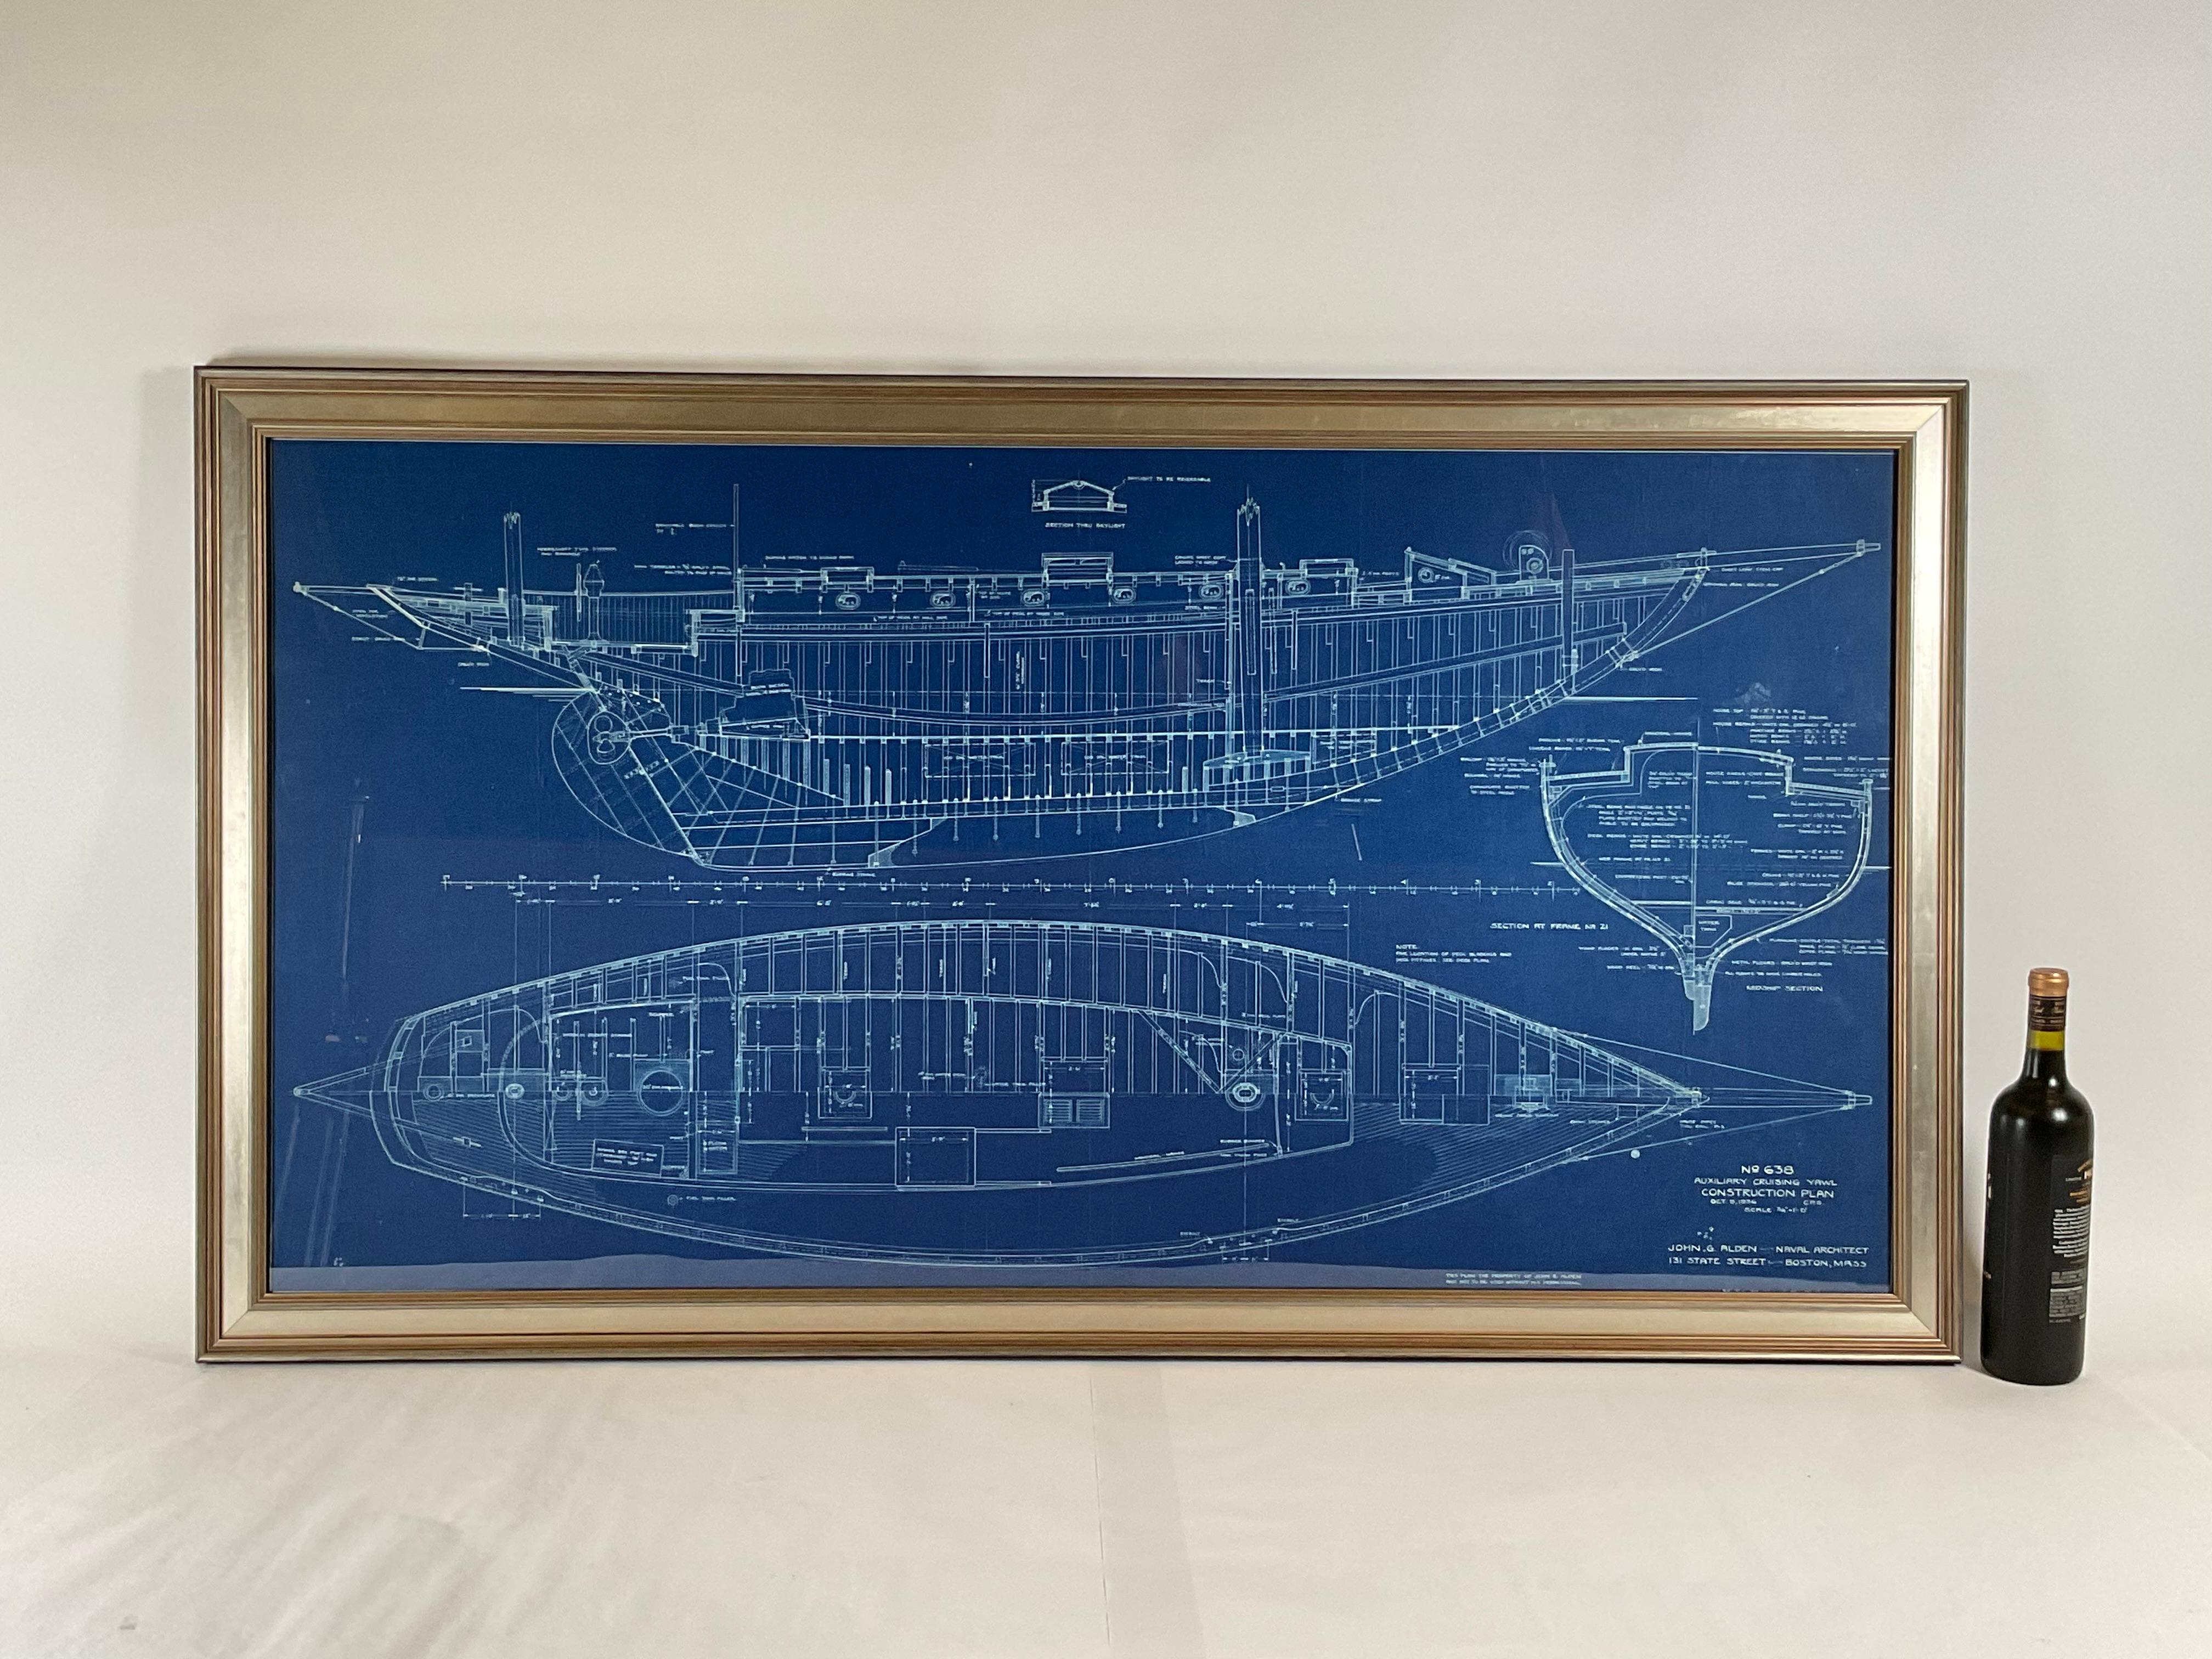 Original yacht blueprint of the cruising yawl evening star. This is from the offices of John G. Alden, Yacht Architects, Boston. The legend on the lower right of the drawing reads no. 638, auxiliary cruising yawl, cabin plan. Dated October 17, 1936.